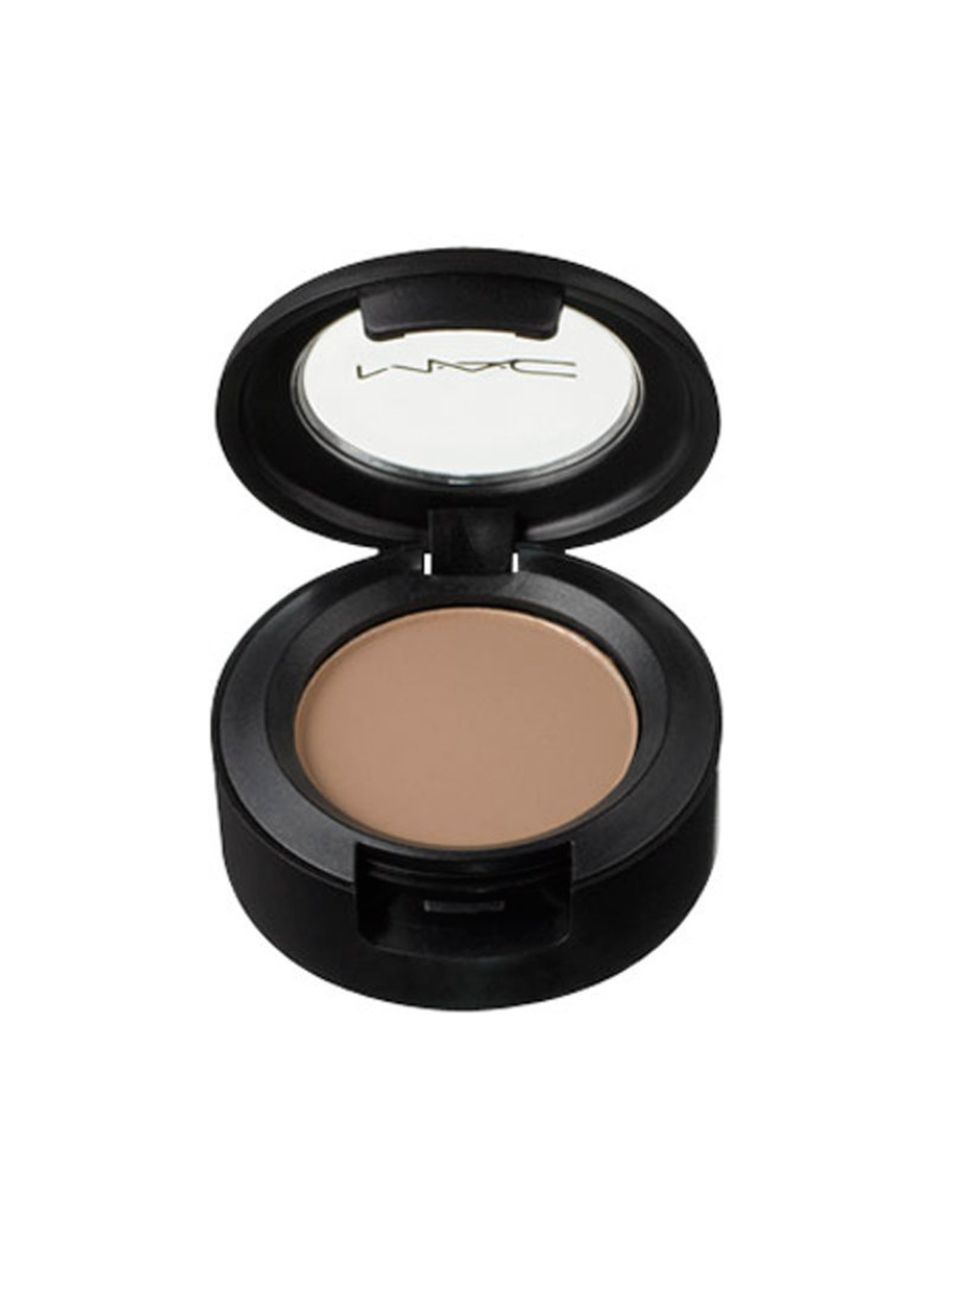 &lt;p&gt;You want an eyeshadow that is going to add depth to the eye but isn&#039;t too dark that it looks like a full-on try-hard smoky eye. Enter MAC&#039;s Eyeshadow in Omega, &pound;12.50 a matte suede brown that will add subtle definition to the eye 